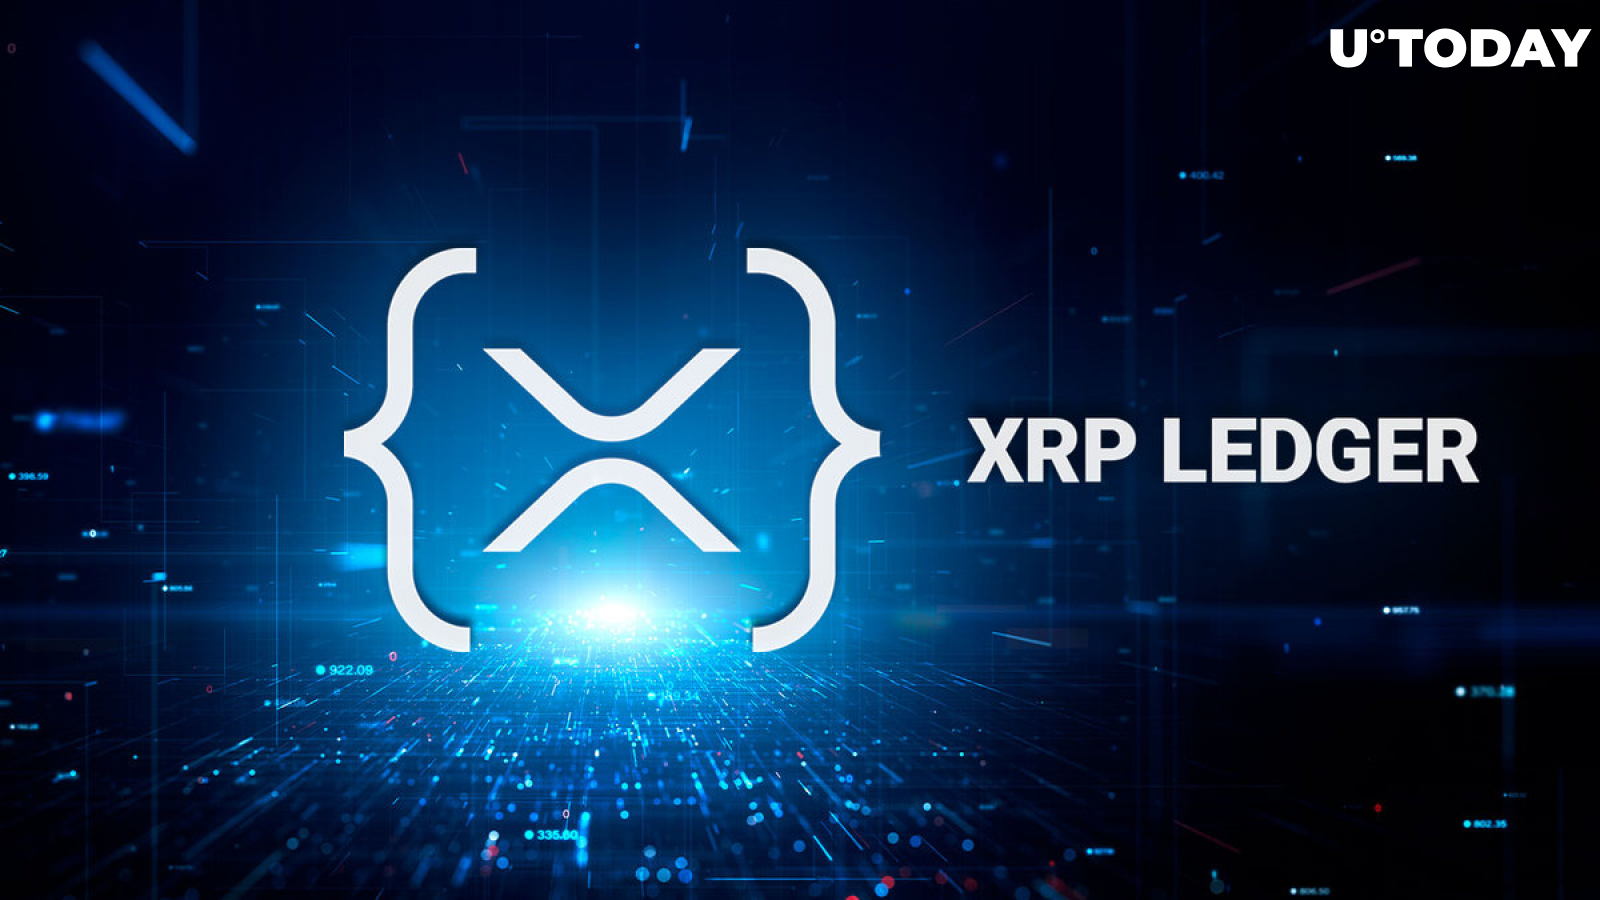 XRP Ledger Witnesses Unusual 350% Transaction Spike, But There's a Catch